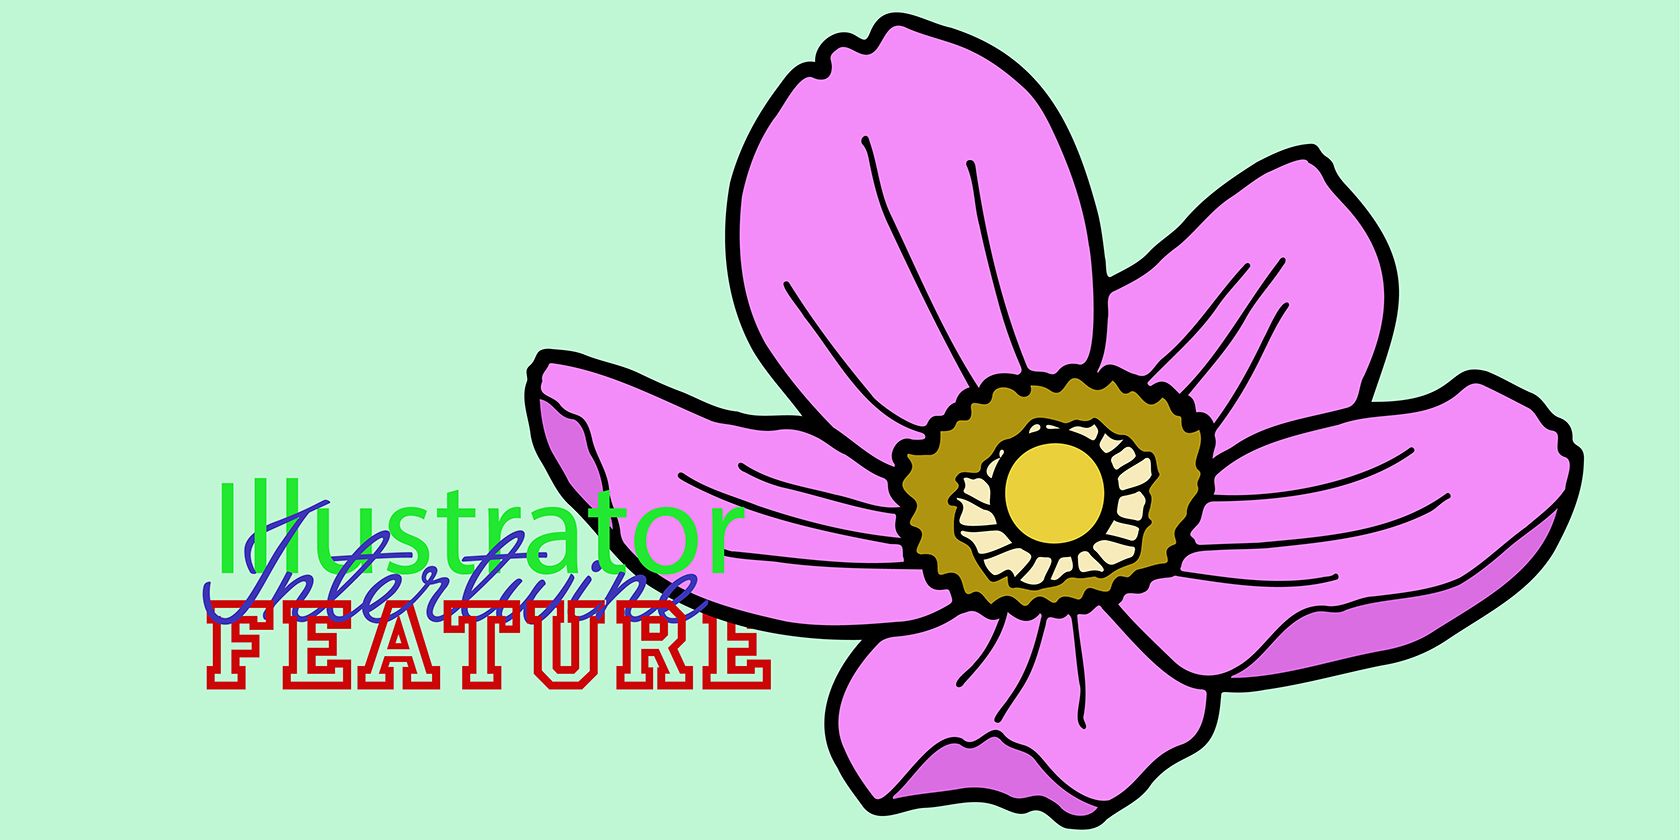 Intertwined text with pink flower illustration.